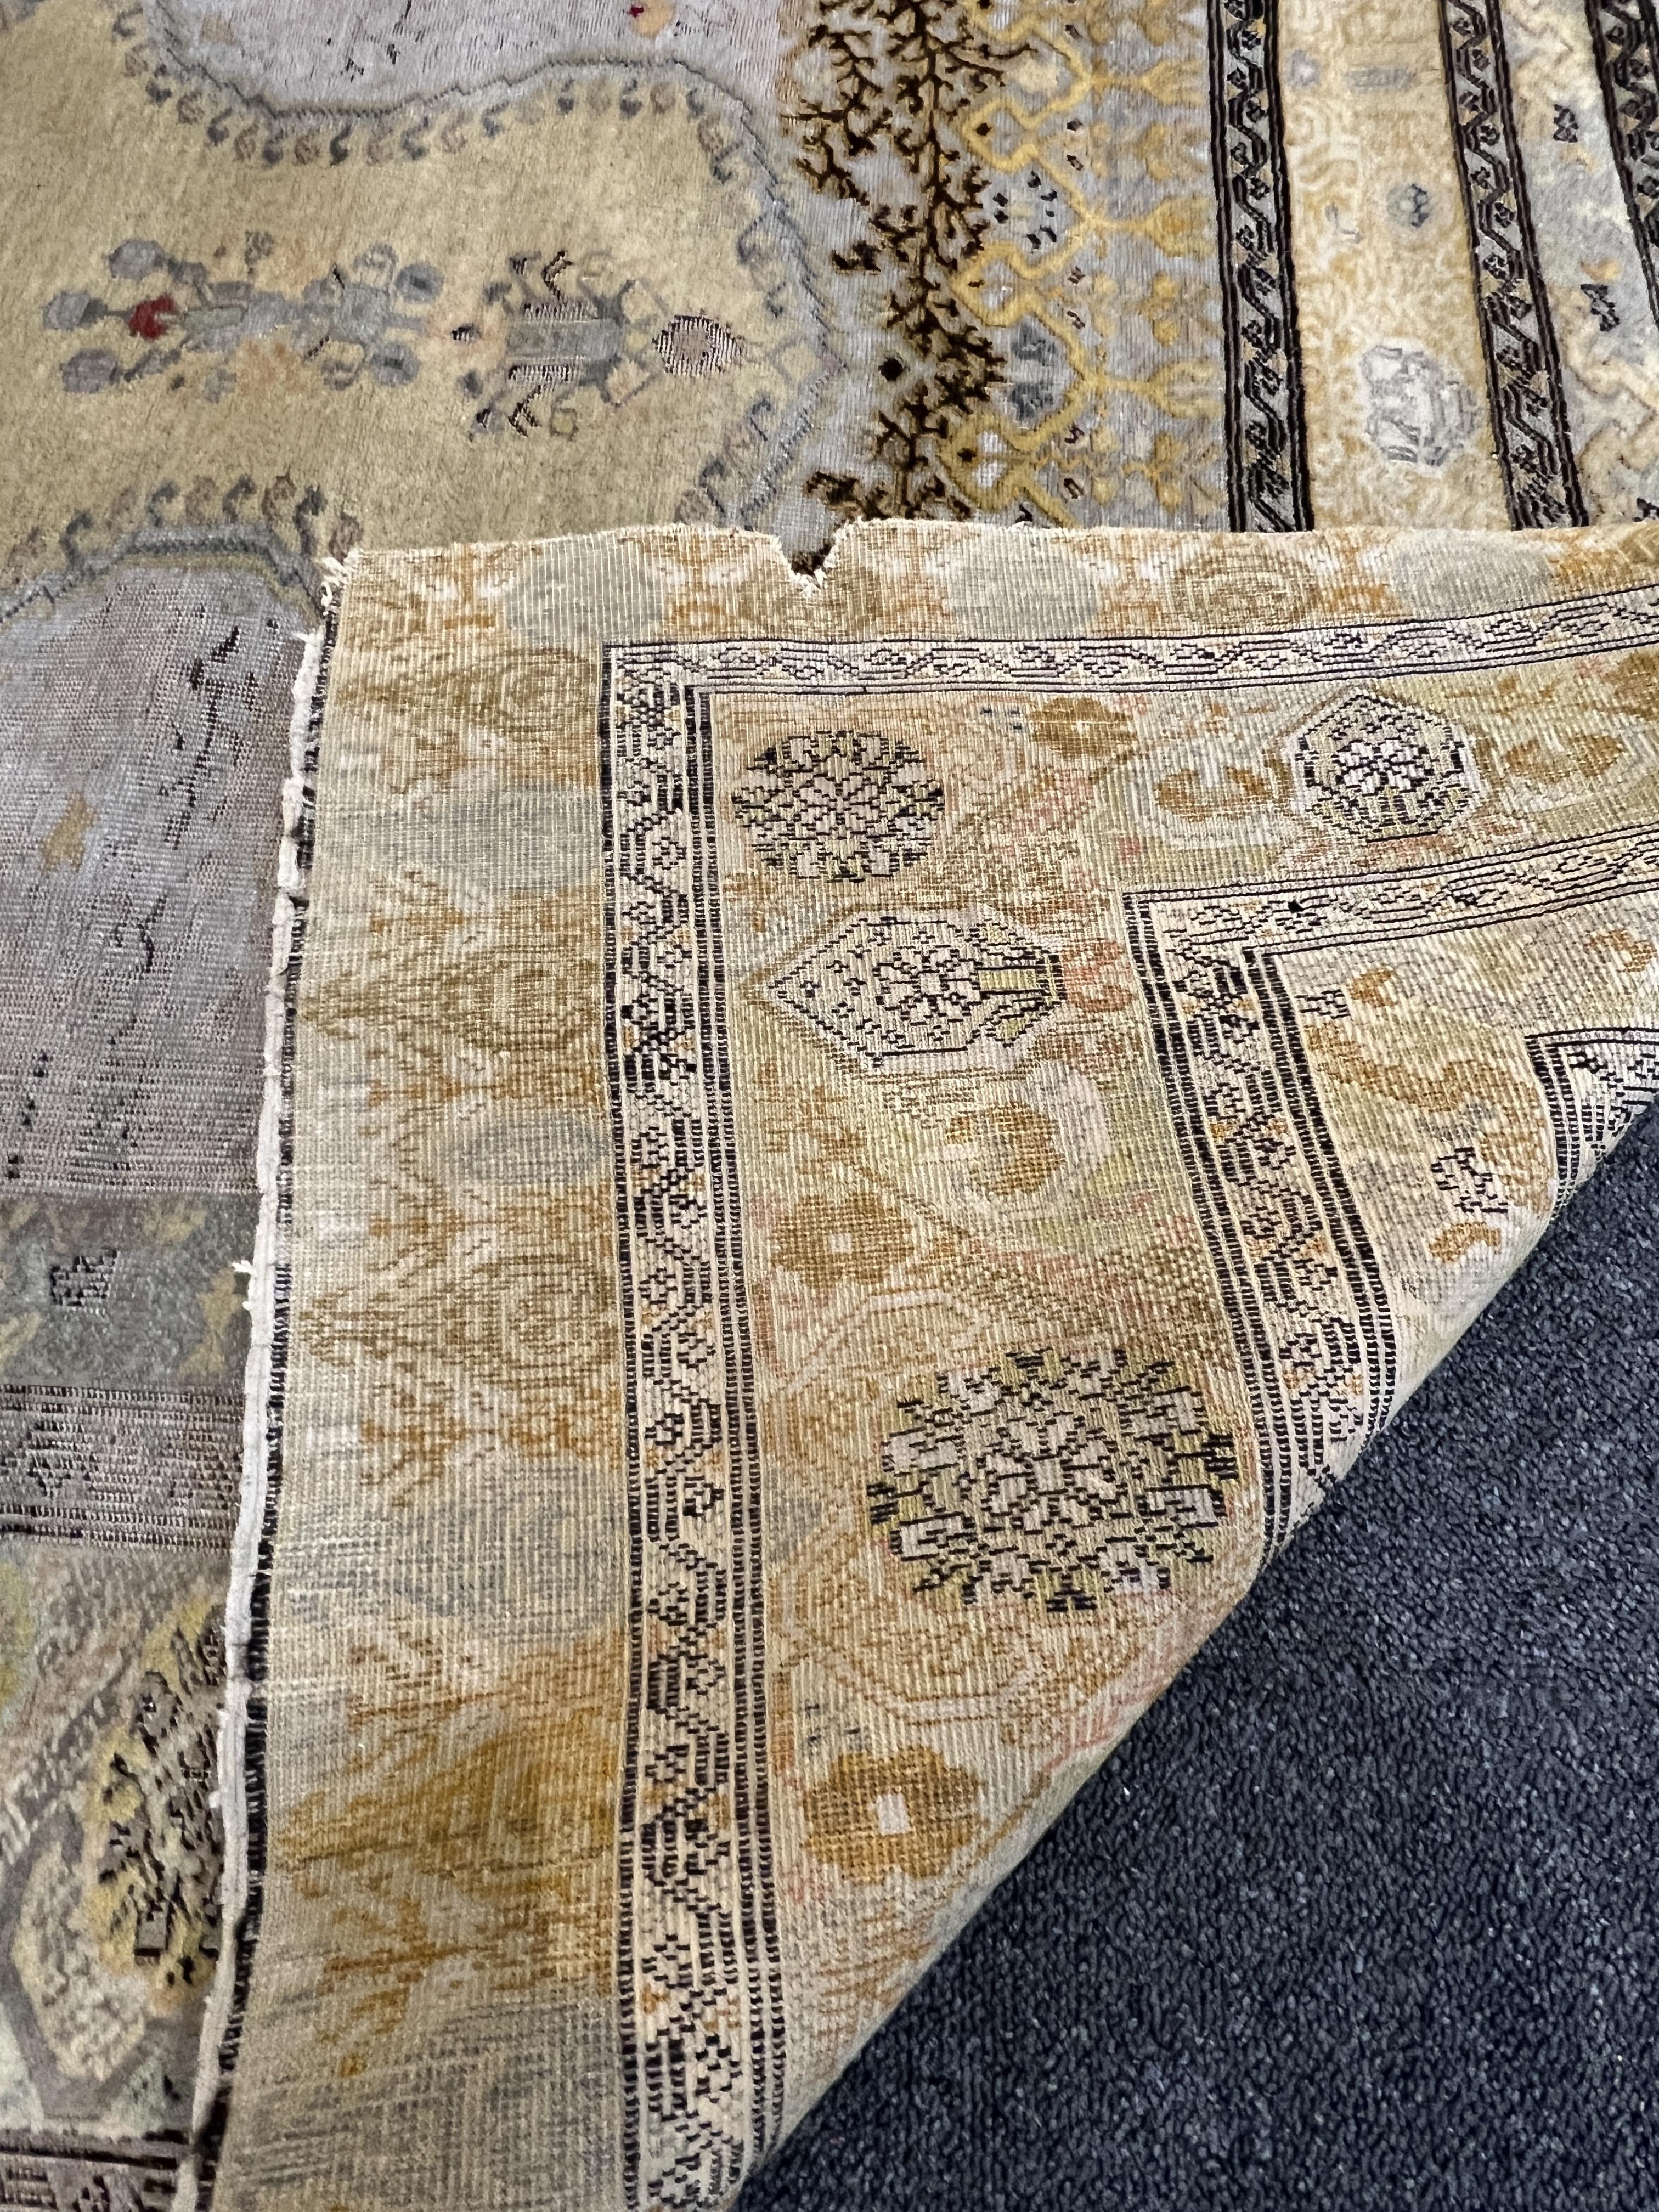 A Turkish silk prayer rug, with mihrab and stylised foliate borders on a gold ground, 185 x 137cm. Condition - the central panel severely worn to the tip of the mirror, lower fringe worn with losses.